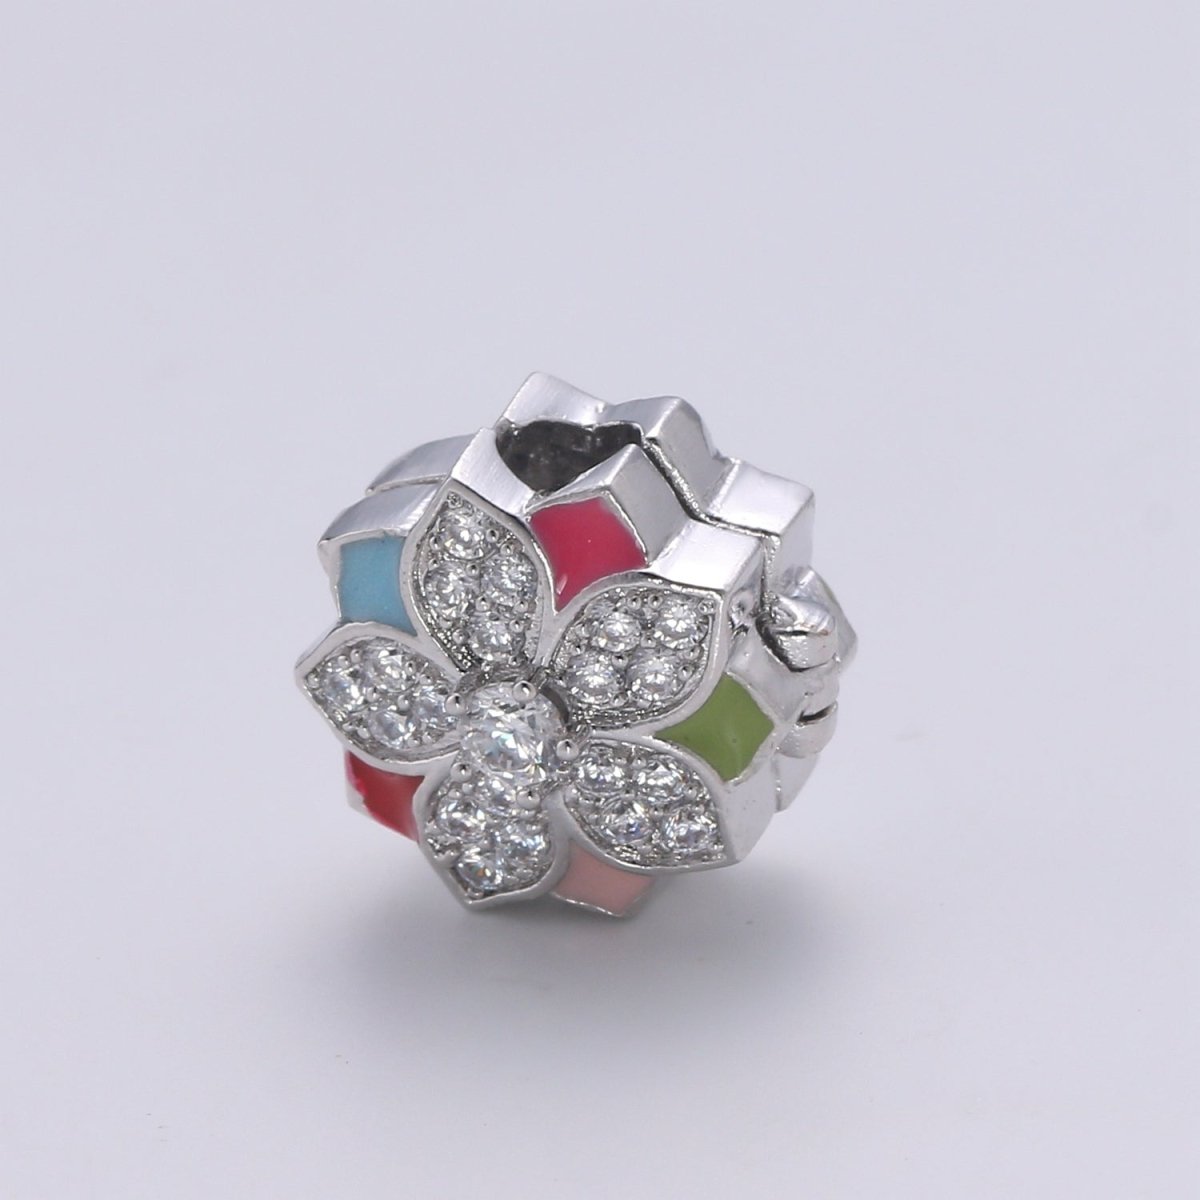 Crystal and Colorful Flower on Gold Filled Round Beads CZ Silver Floral Nature Jewelry Making Beads B361 - DLUXCA